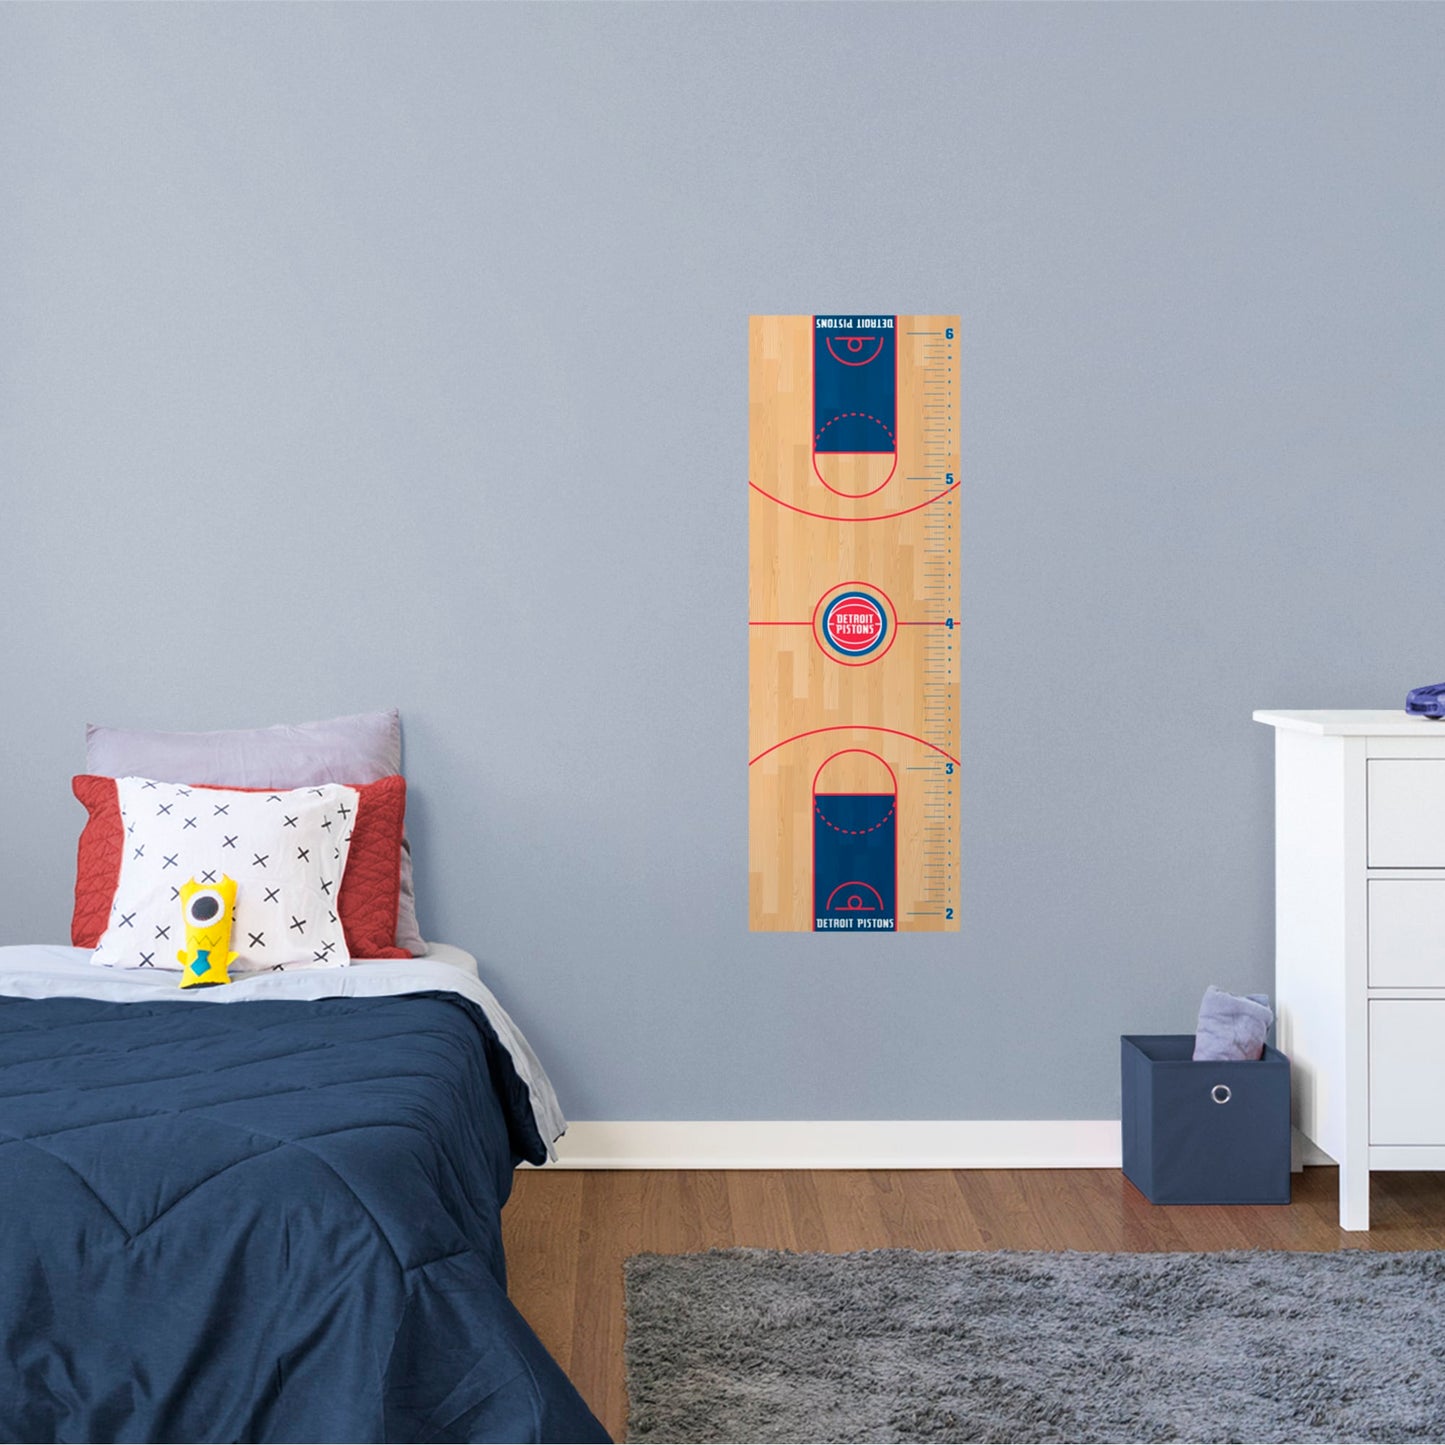 Detroit Pistons: Growth Chart - Officially Licensed NBA Removable Wall Decal